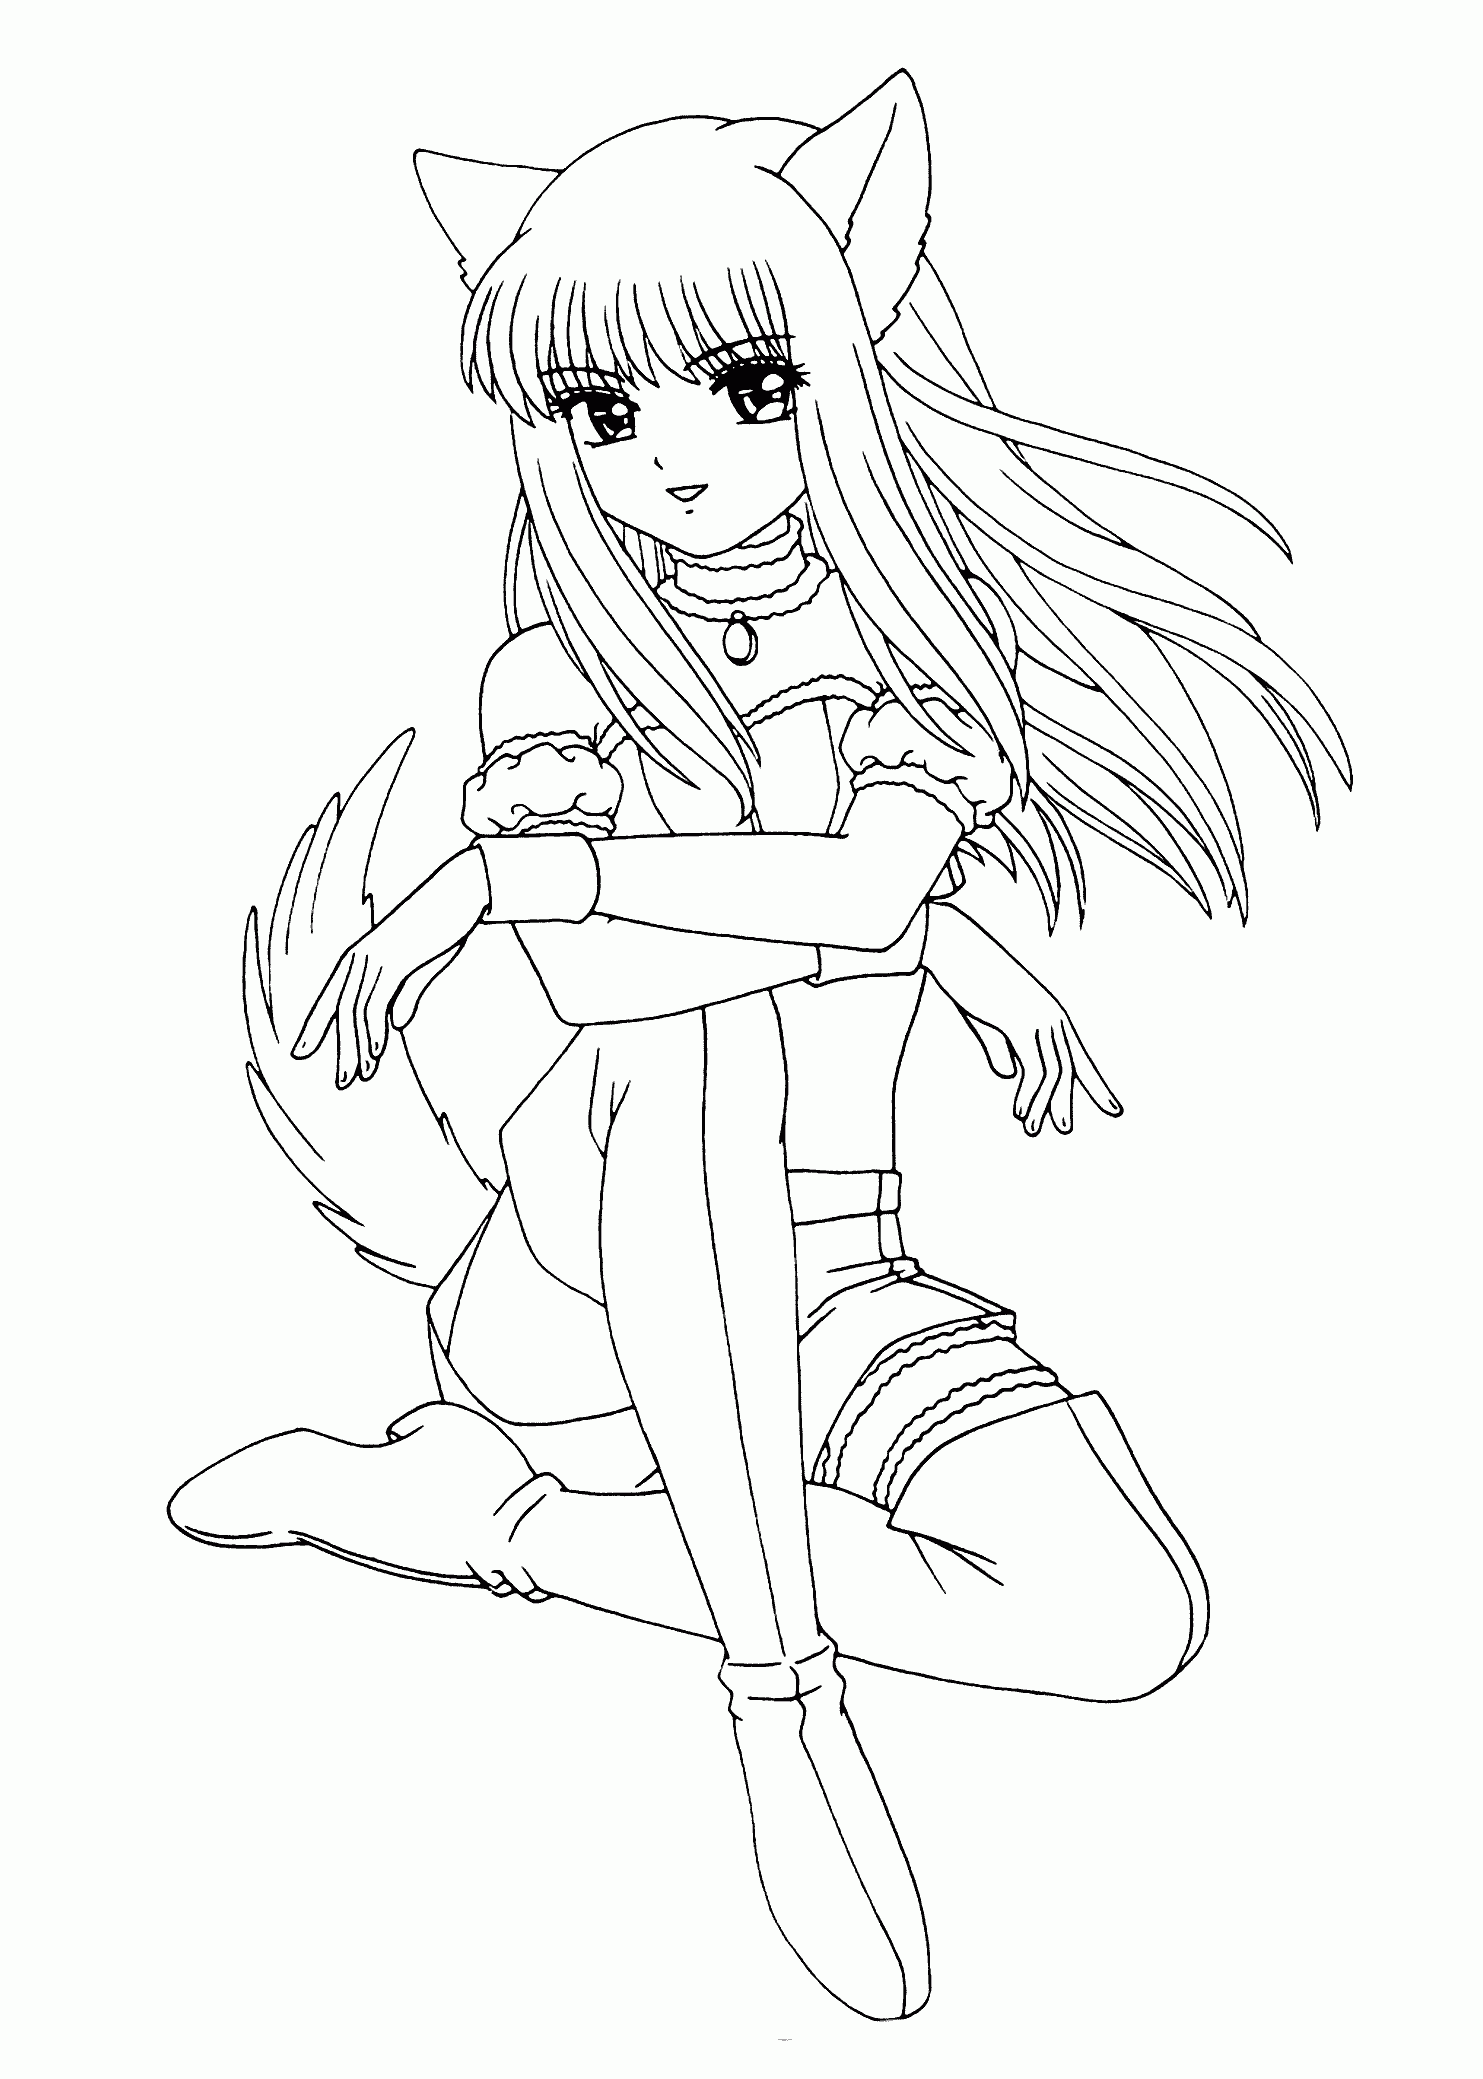 13 Best of Anime Girl Coloring Pages - Bestofcoloring.com